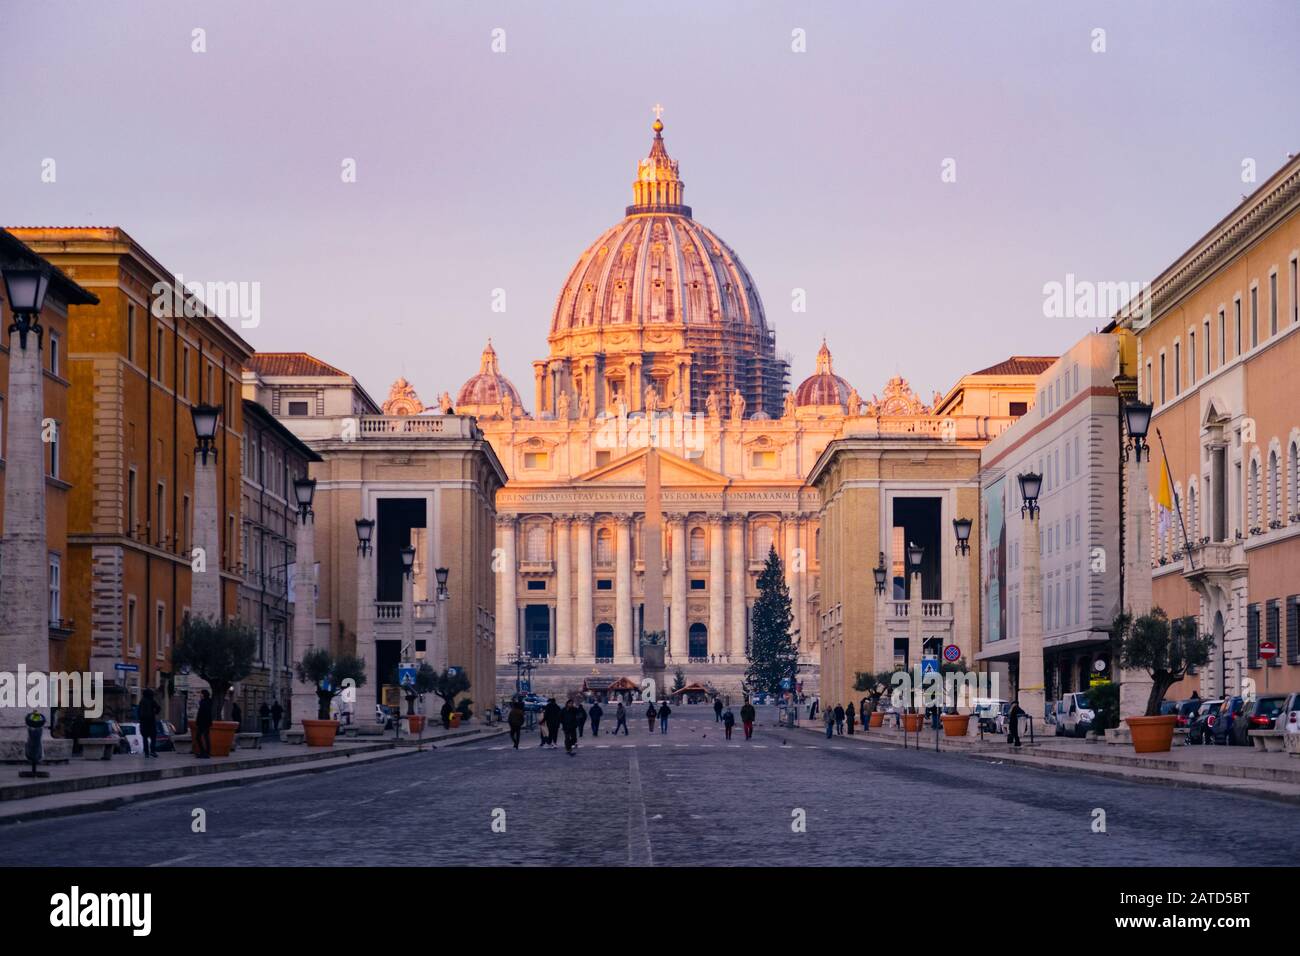 Rome, Italy - Jan 3, 2020: St. Peters Square and St. Peters Basilica  Vatican City, UNESCO World Heritage Site, Rome, Lazio, Italy, Europe Stock Photo